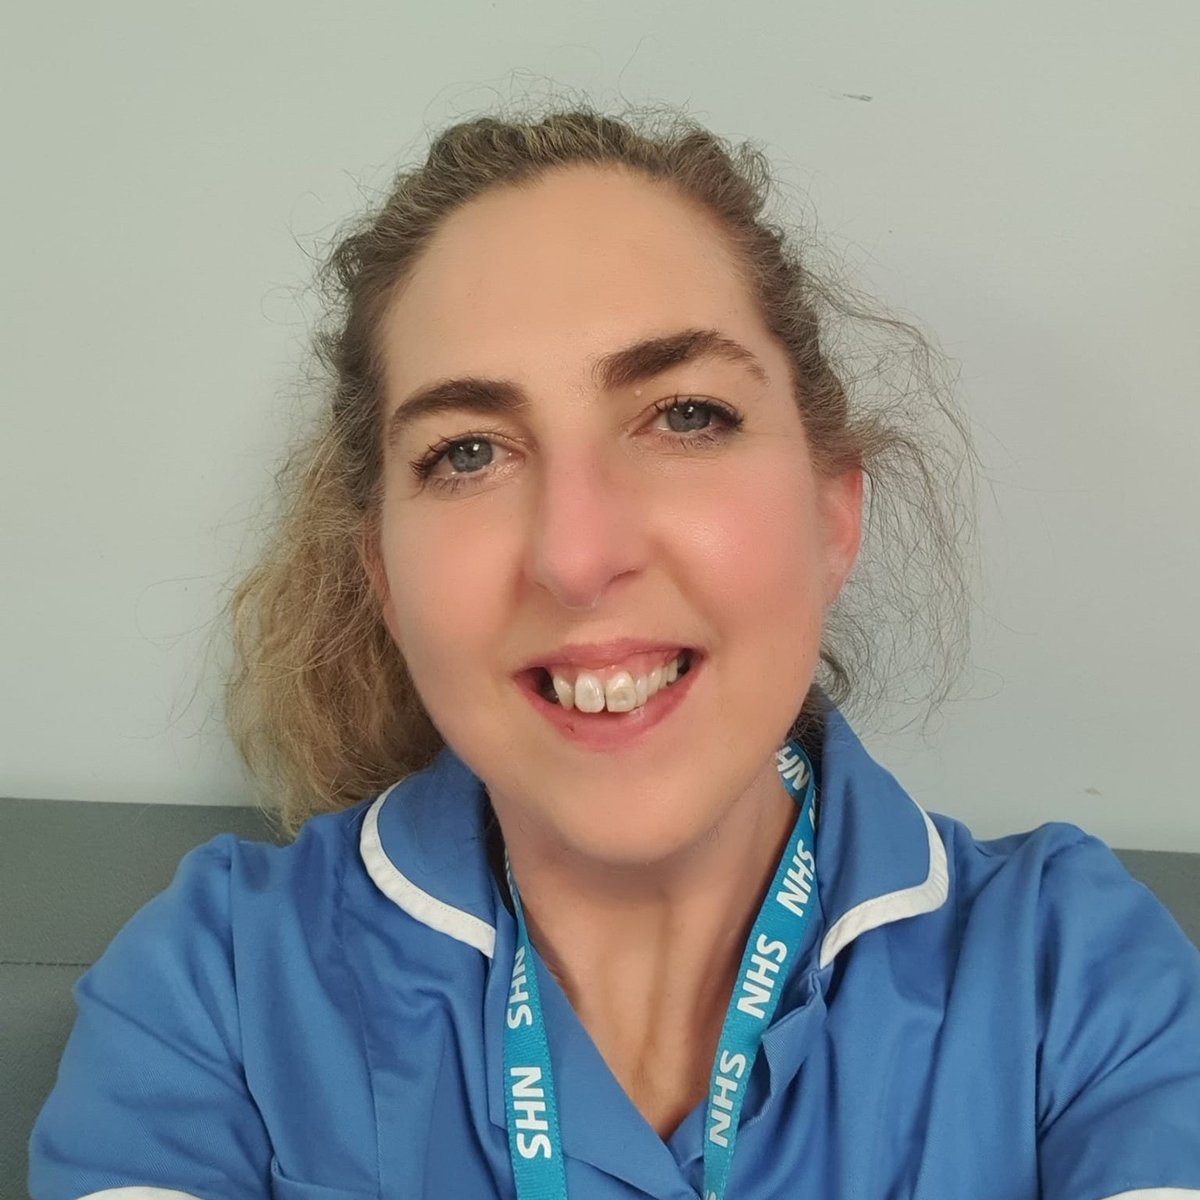 This International Nurses Day - #IND2024, we wanted to share Wendy’s story with you. 👩‍⚕️ Wendy has gone from receiving a heart transplant 13 years ago to now working with heart patients as a newly qualified nurse. An incredible journey! 👏